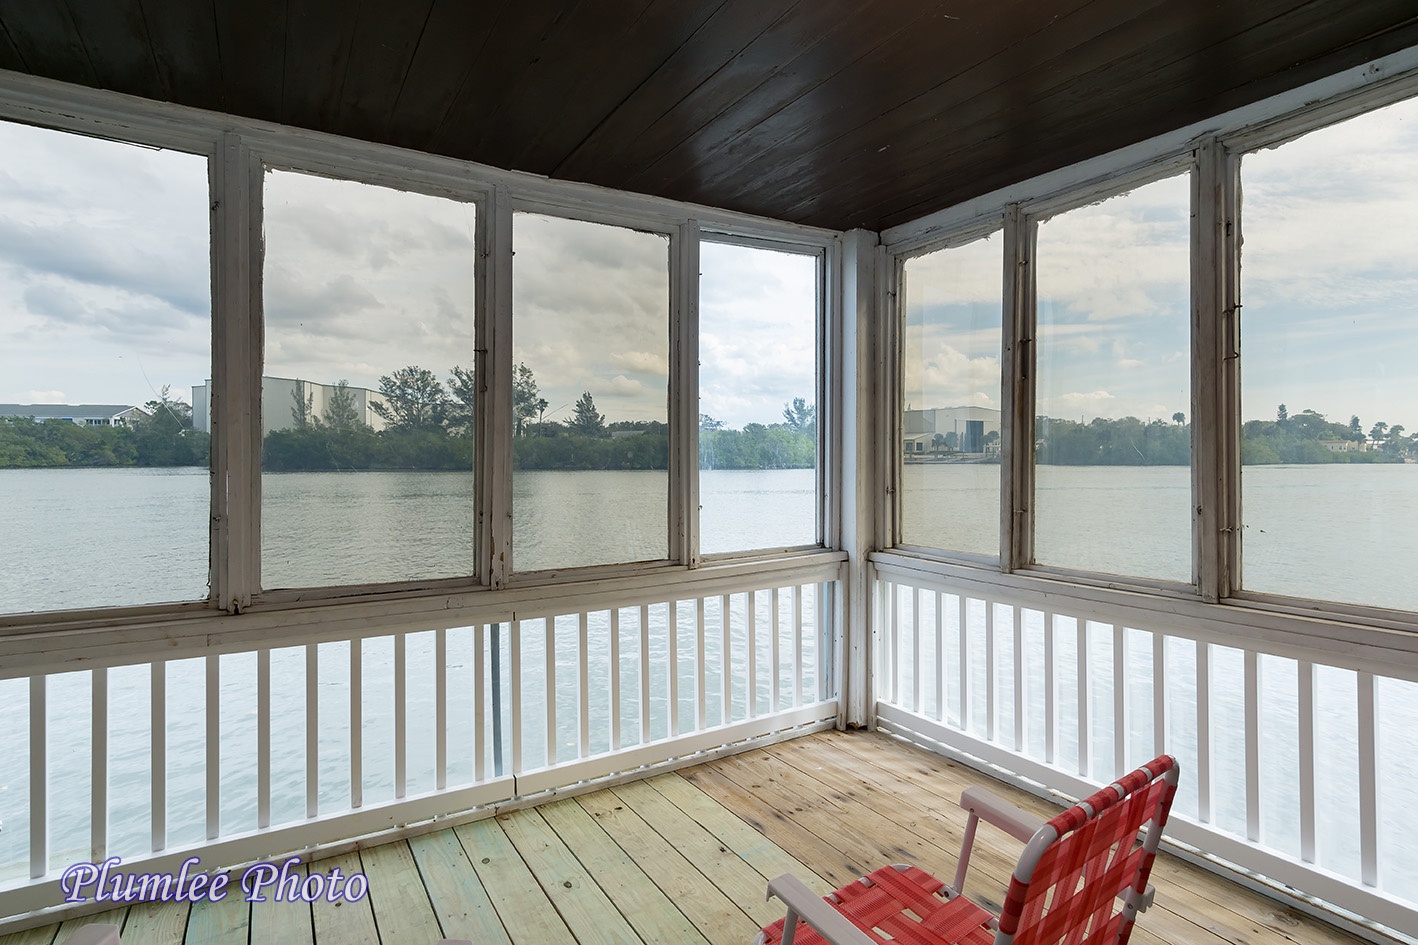 the 1st Floor screened in Porch with views of the Intracoastal Waterway.